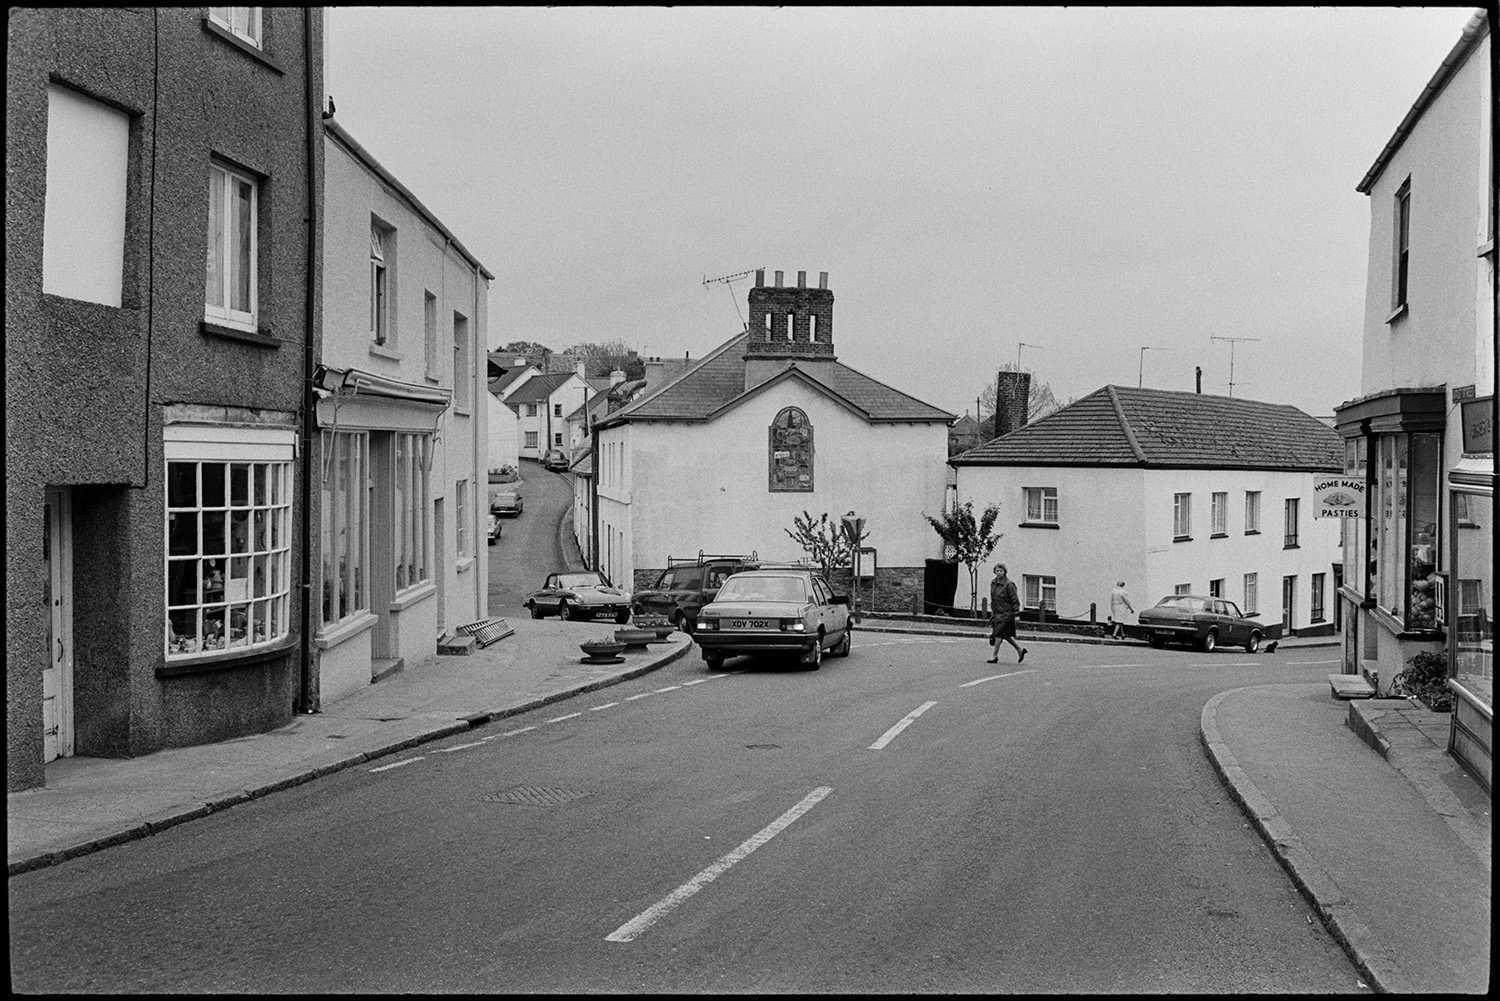 Street scene with pub.
[A view of a street in Hatherleigh with a pasty shop, parked cars and a woman crossing the road.]